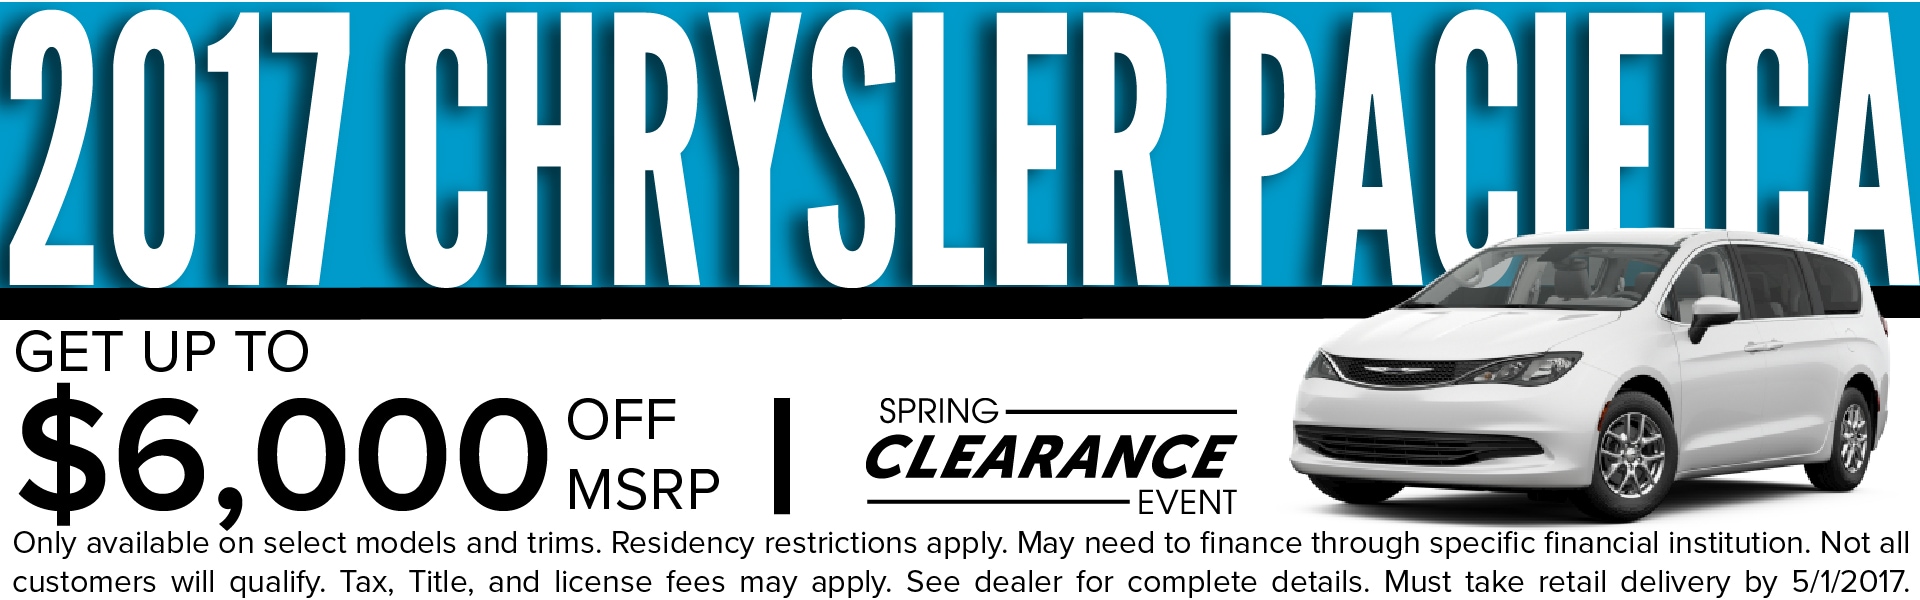 How do you make a car payment to Chrysler Financial?